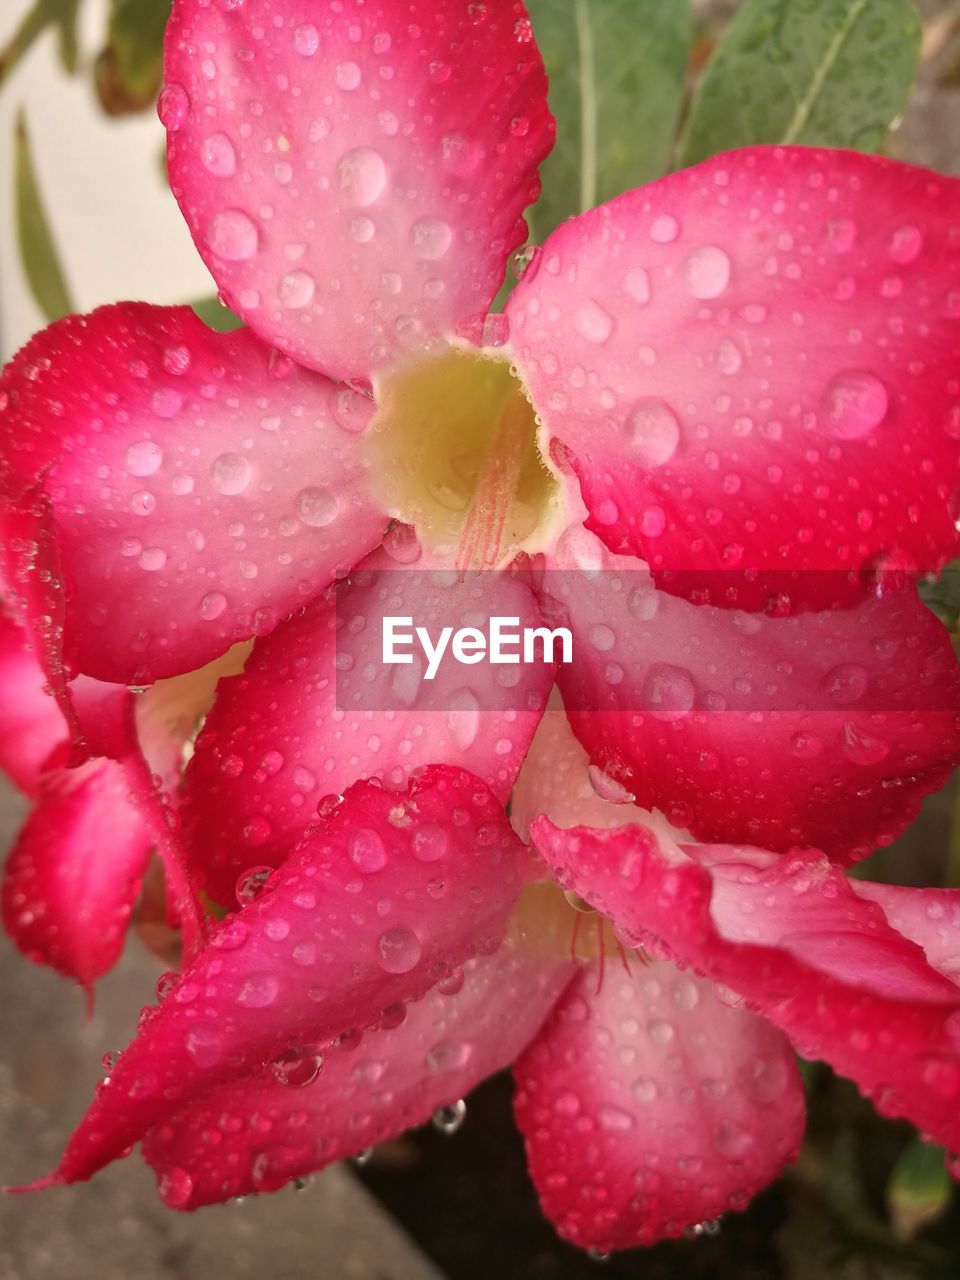 CLOSE-UP OF RAINDROPS ON PINK FLOWER